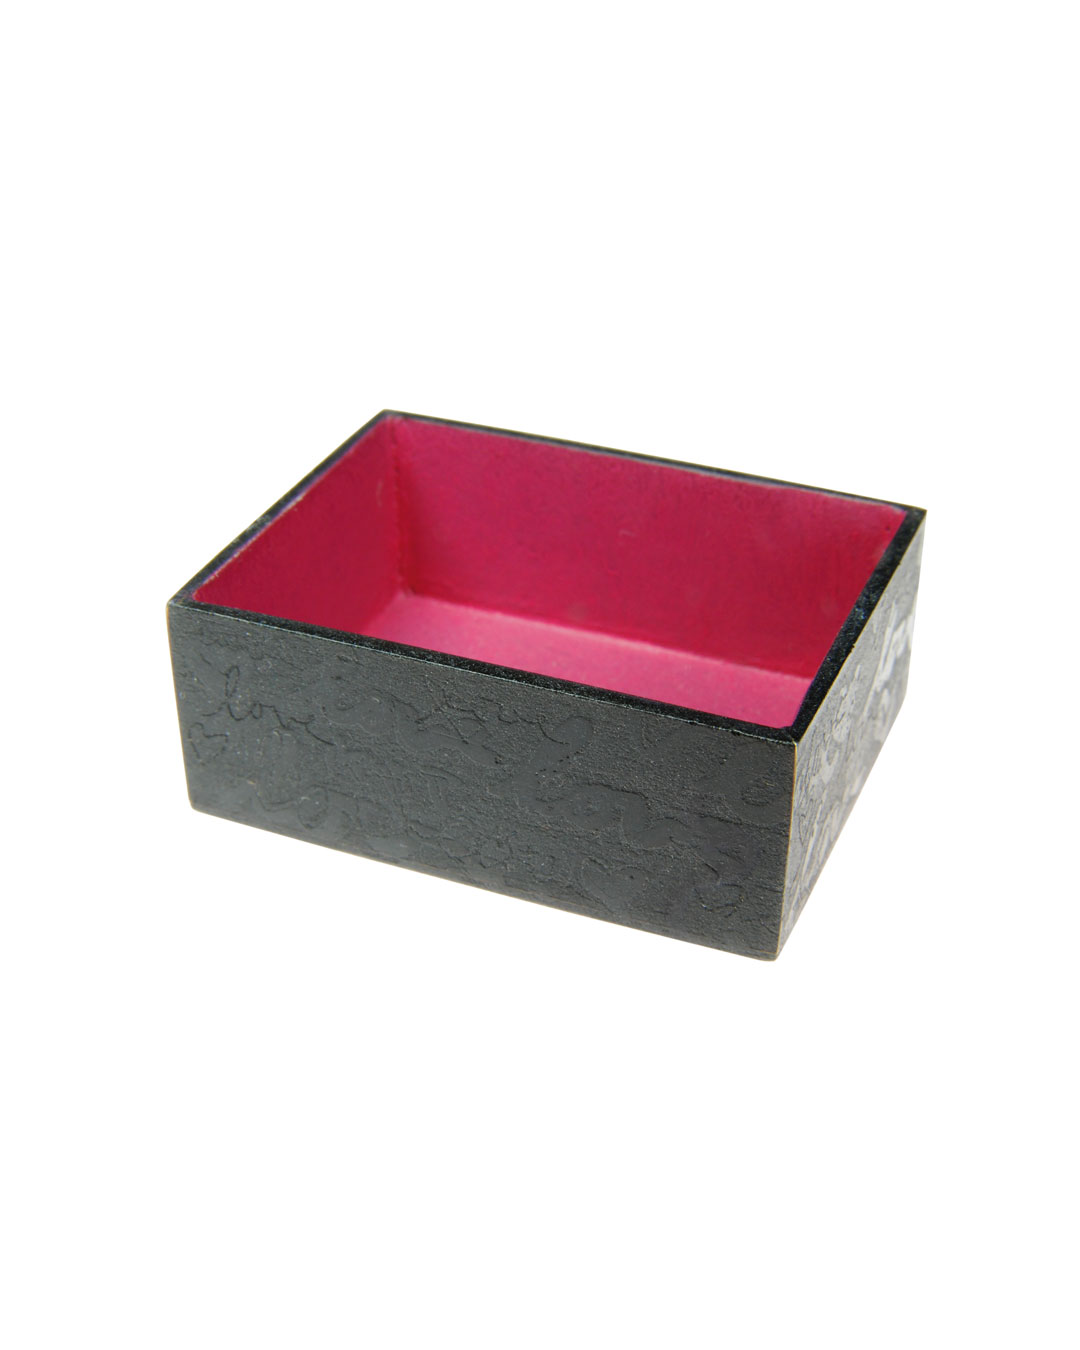 Tore Svensson, Box, 2009, brooch; etched and painted steel, 40 x 30 x 15 mm, €560